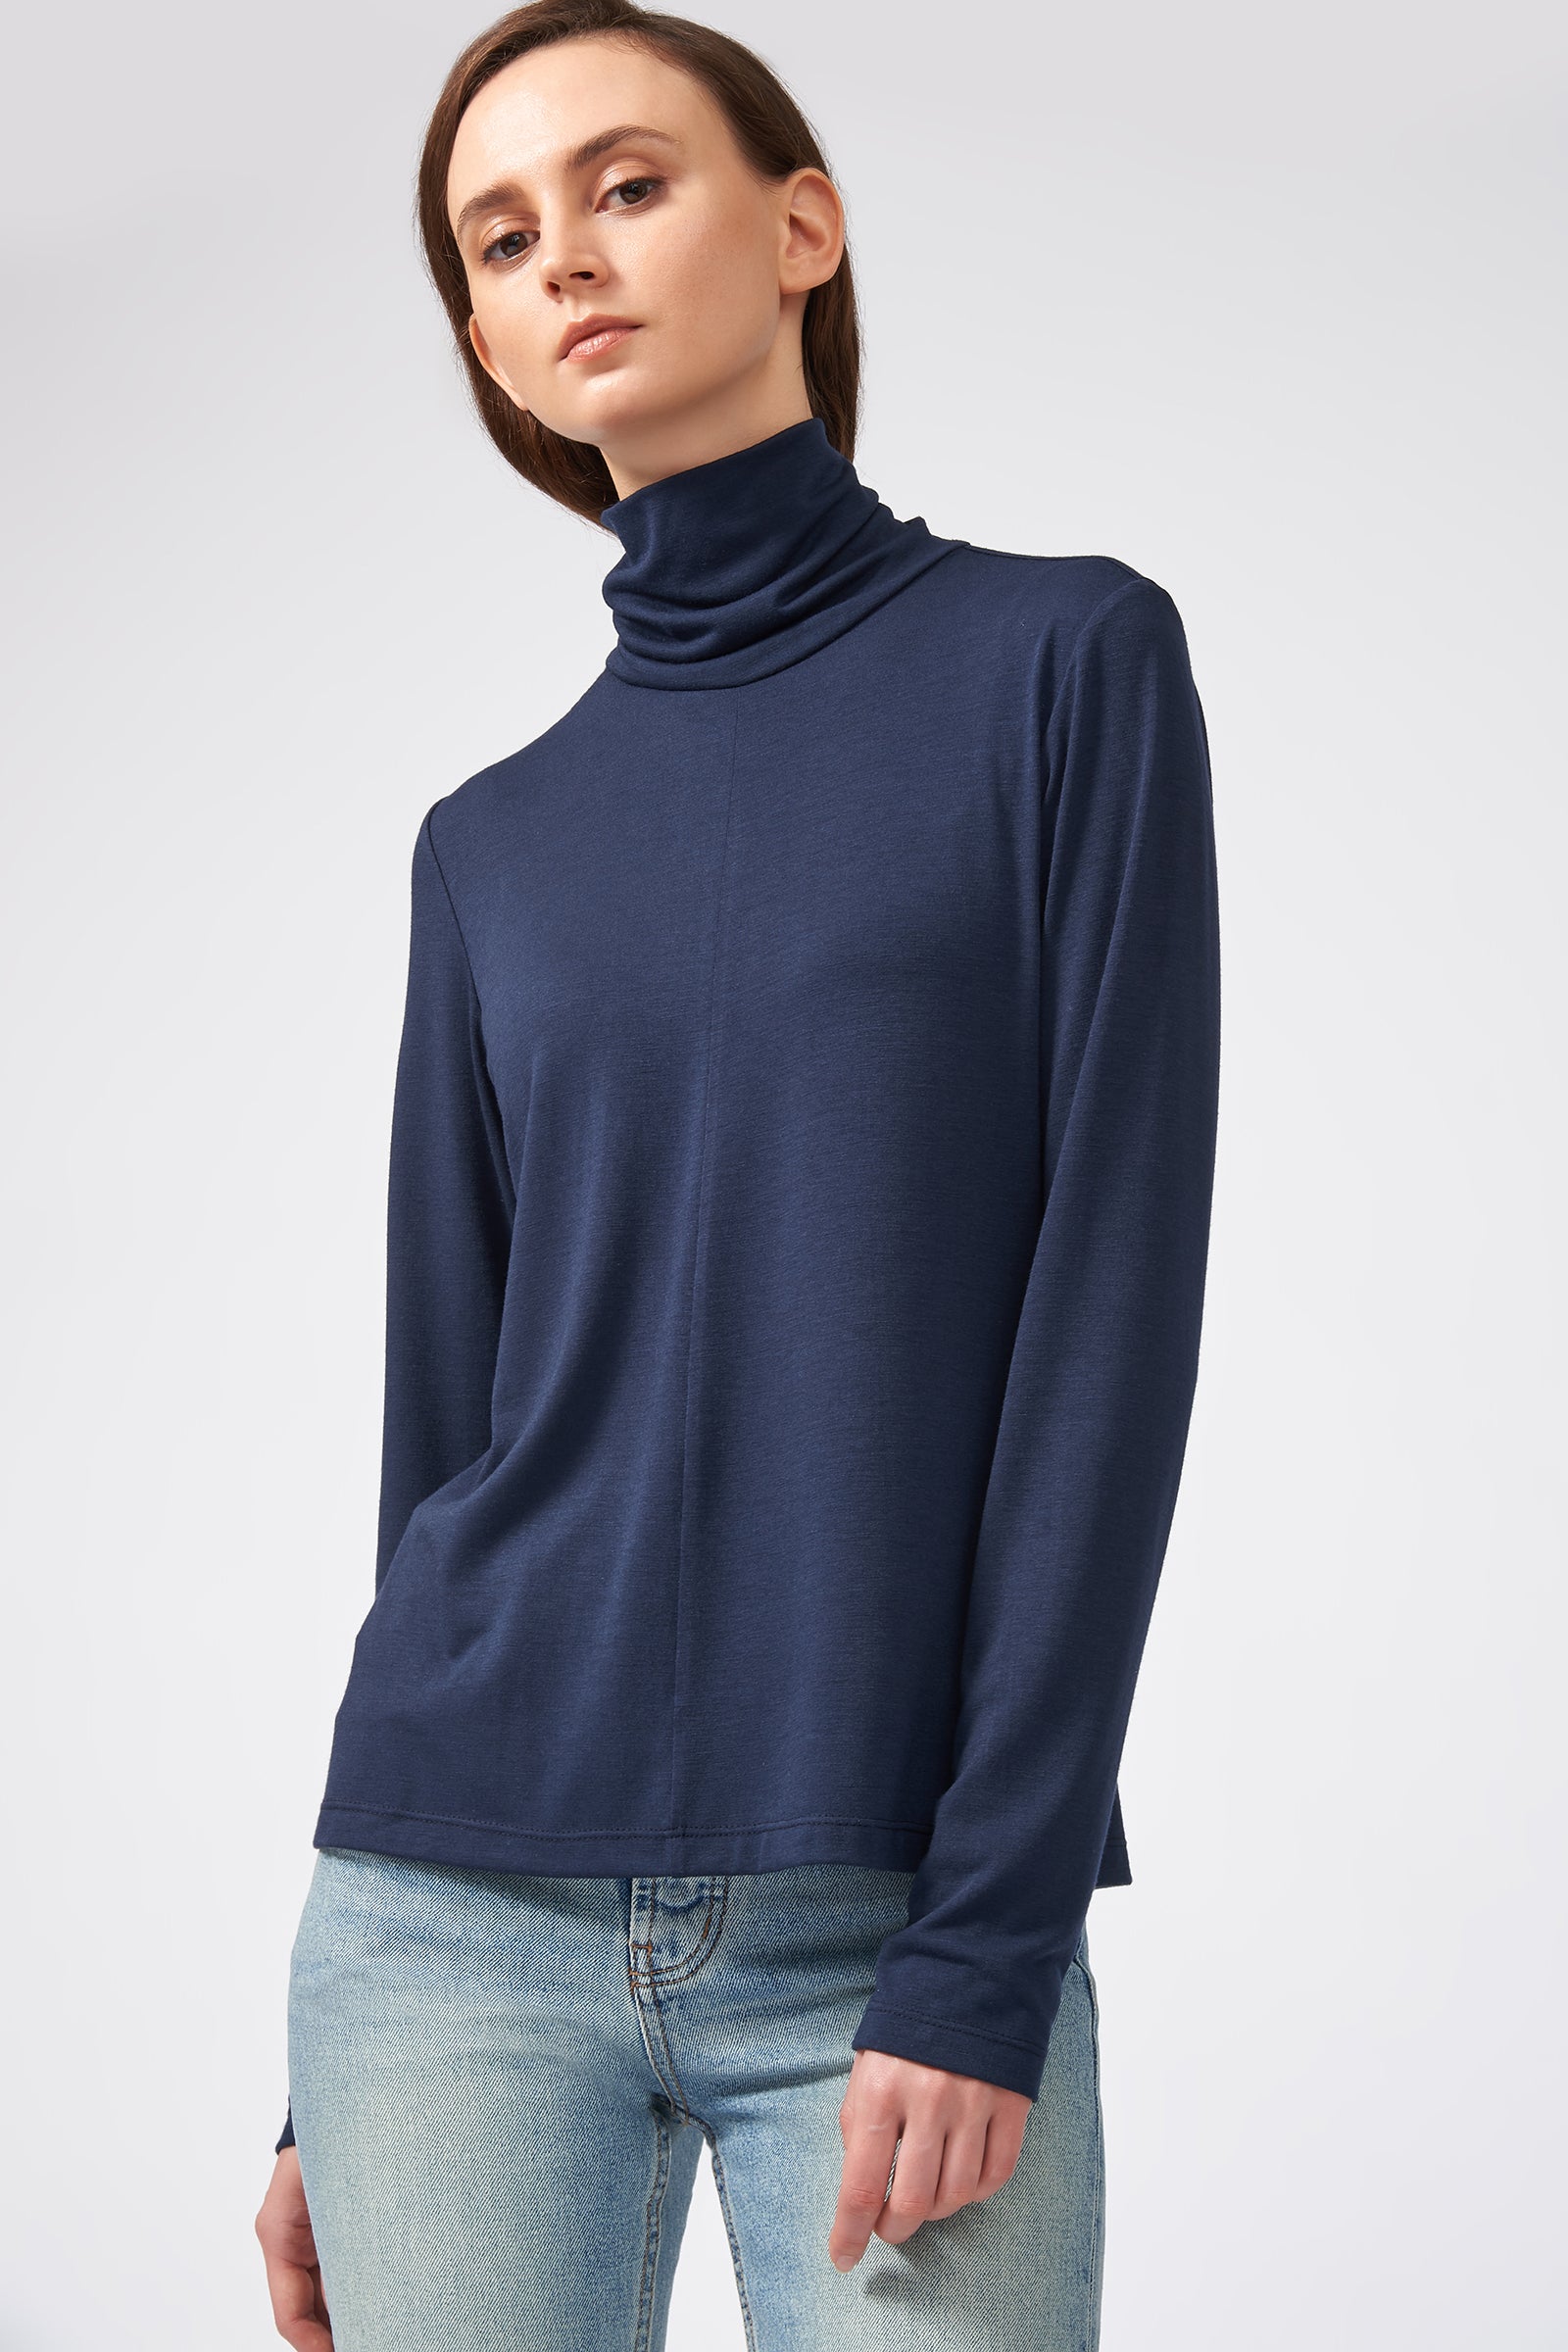 Seamed Fitted Turtleneck in Navy with Turtleneck and Long Sleeves – KAL  RIEMAN